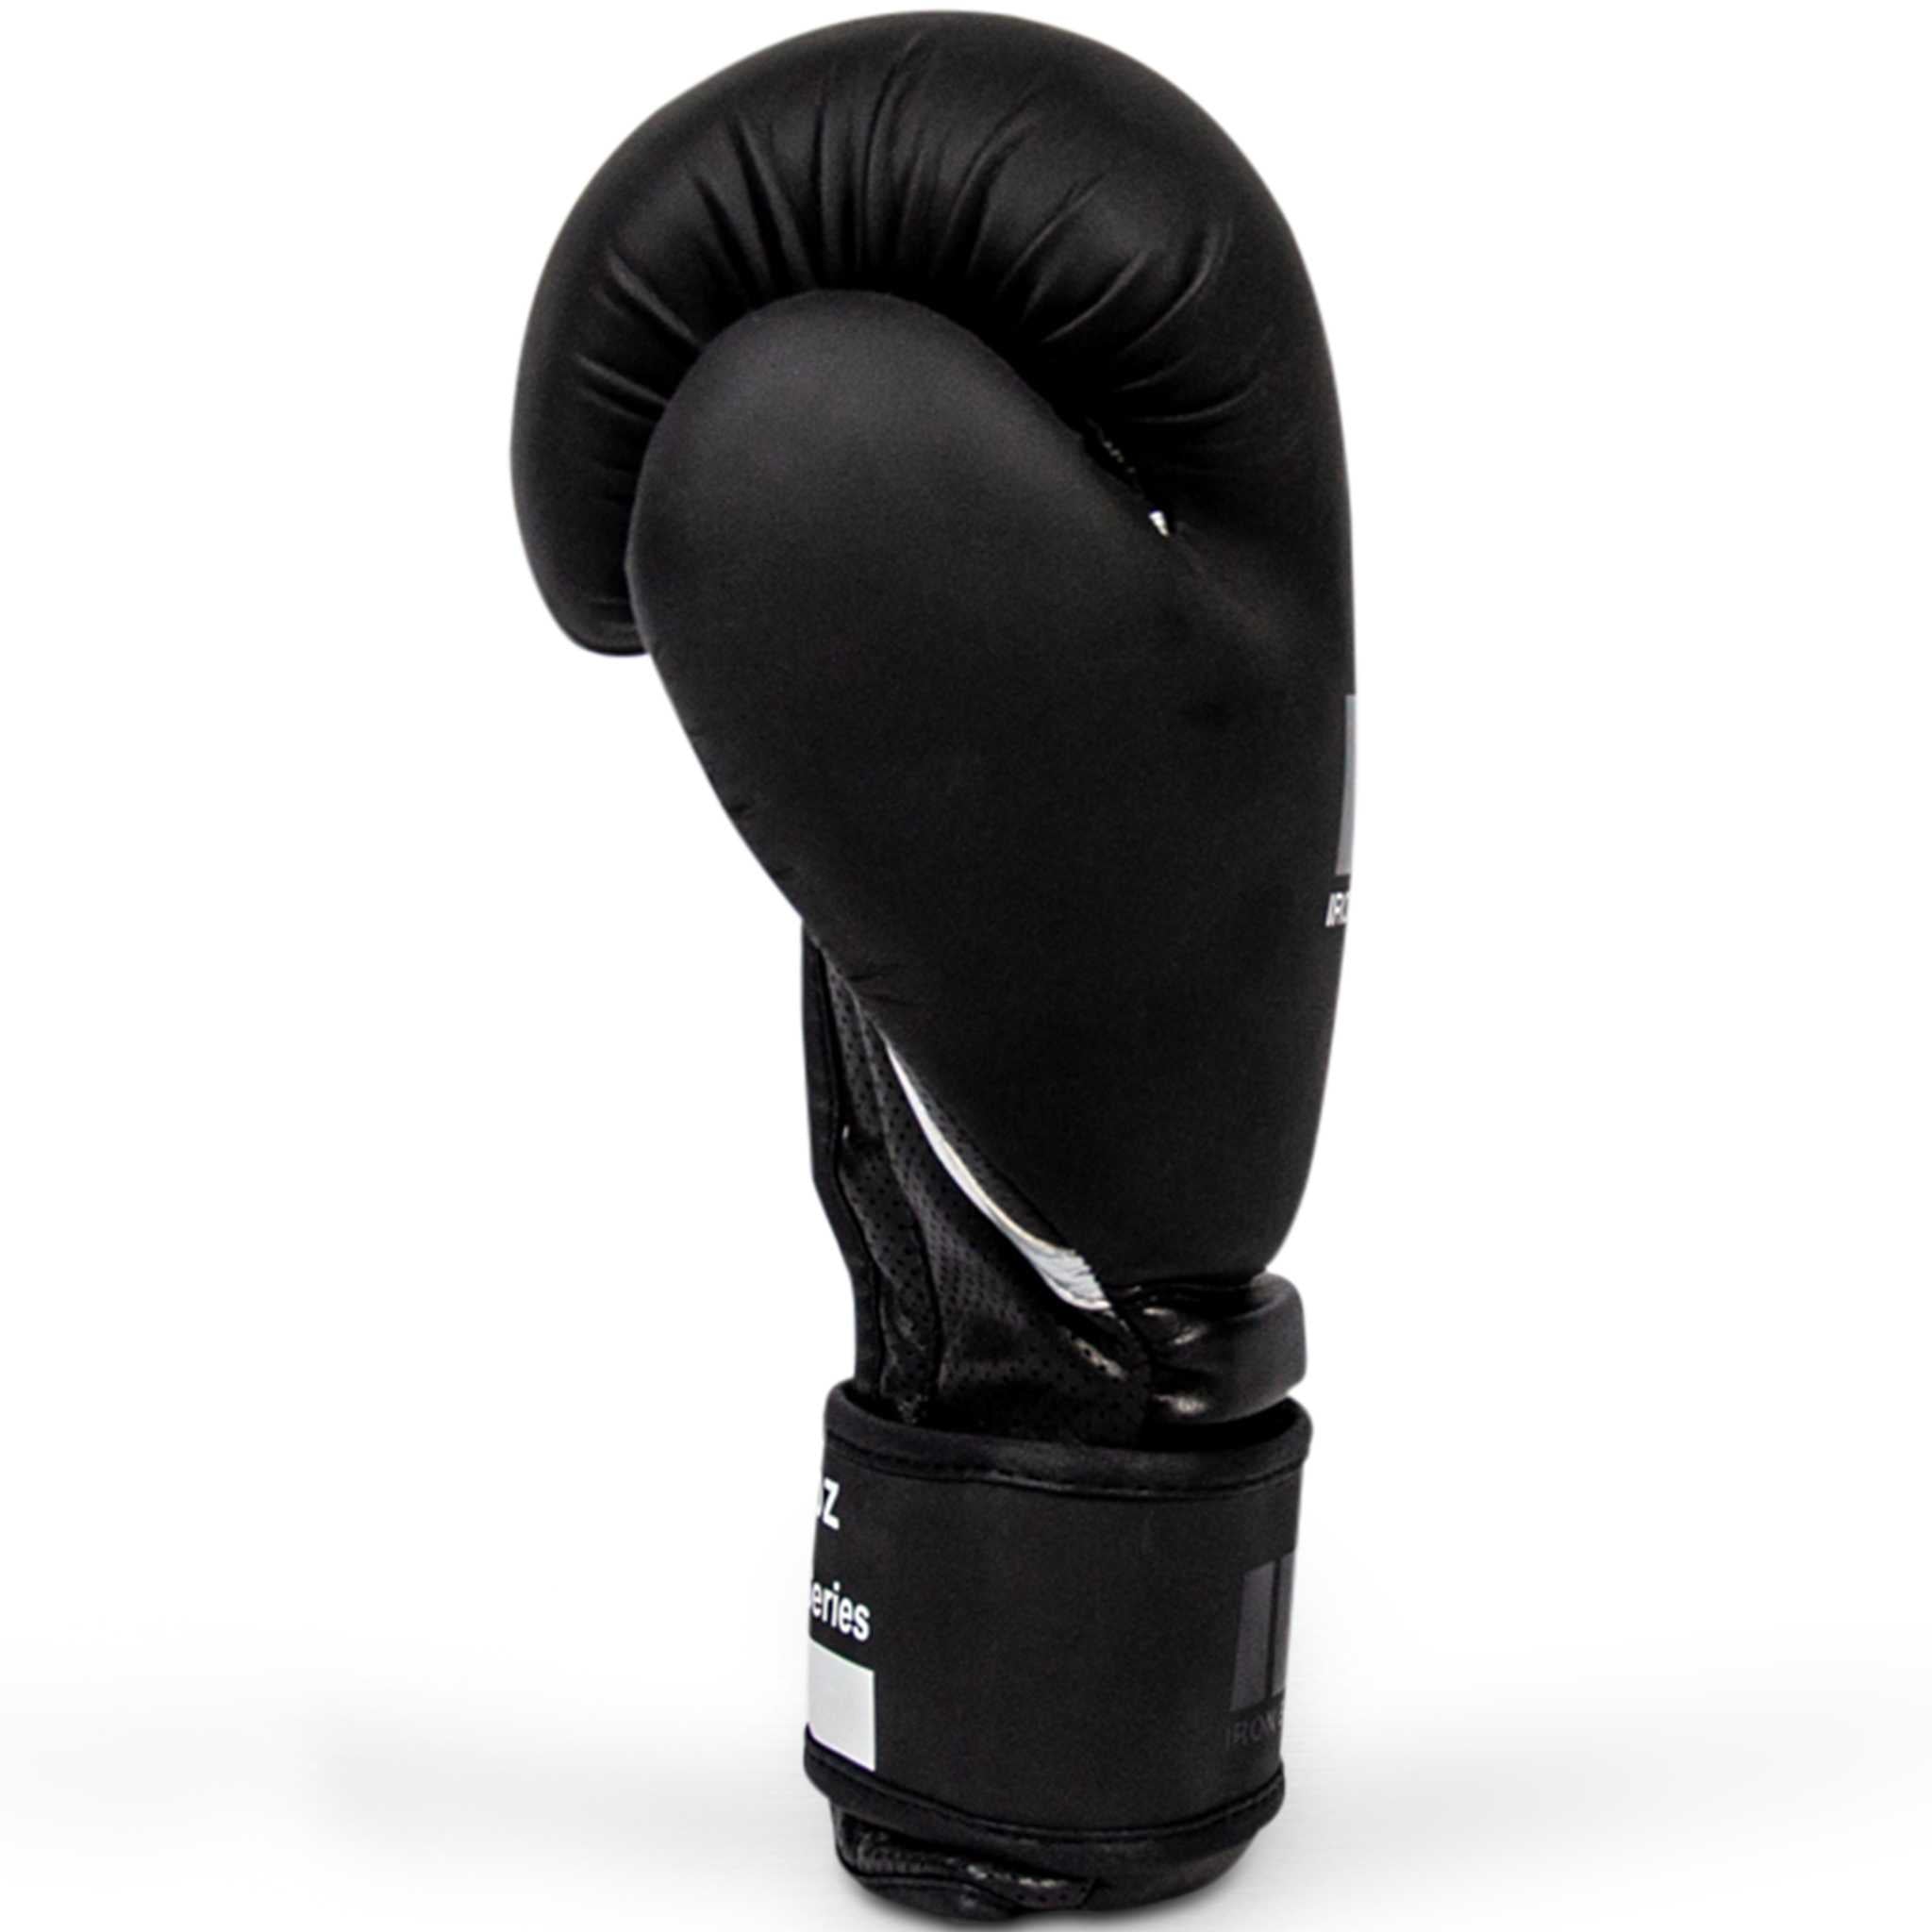 IBF Blackout Series Black Boxing Gloves, All Sizes Available